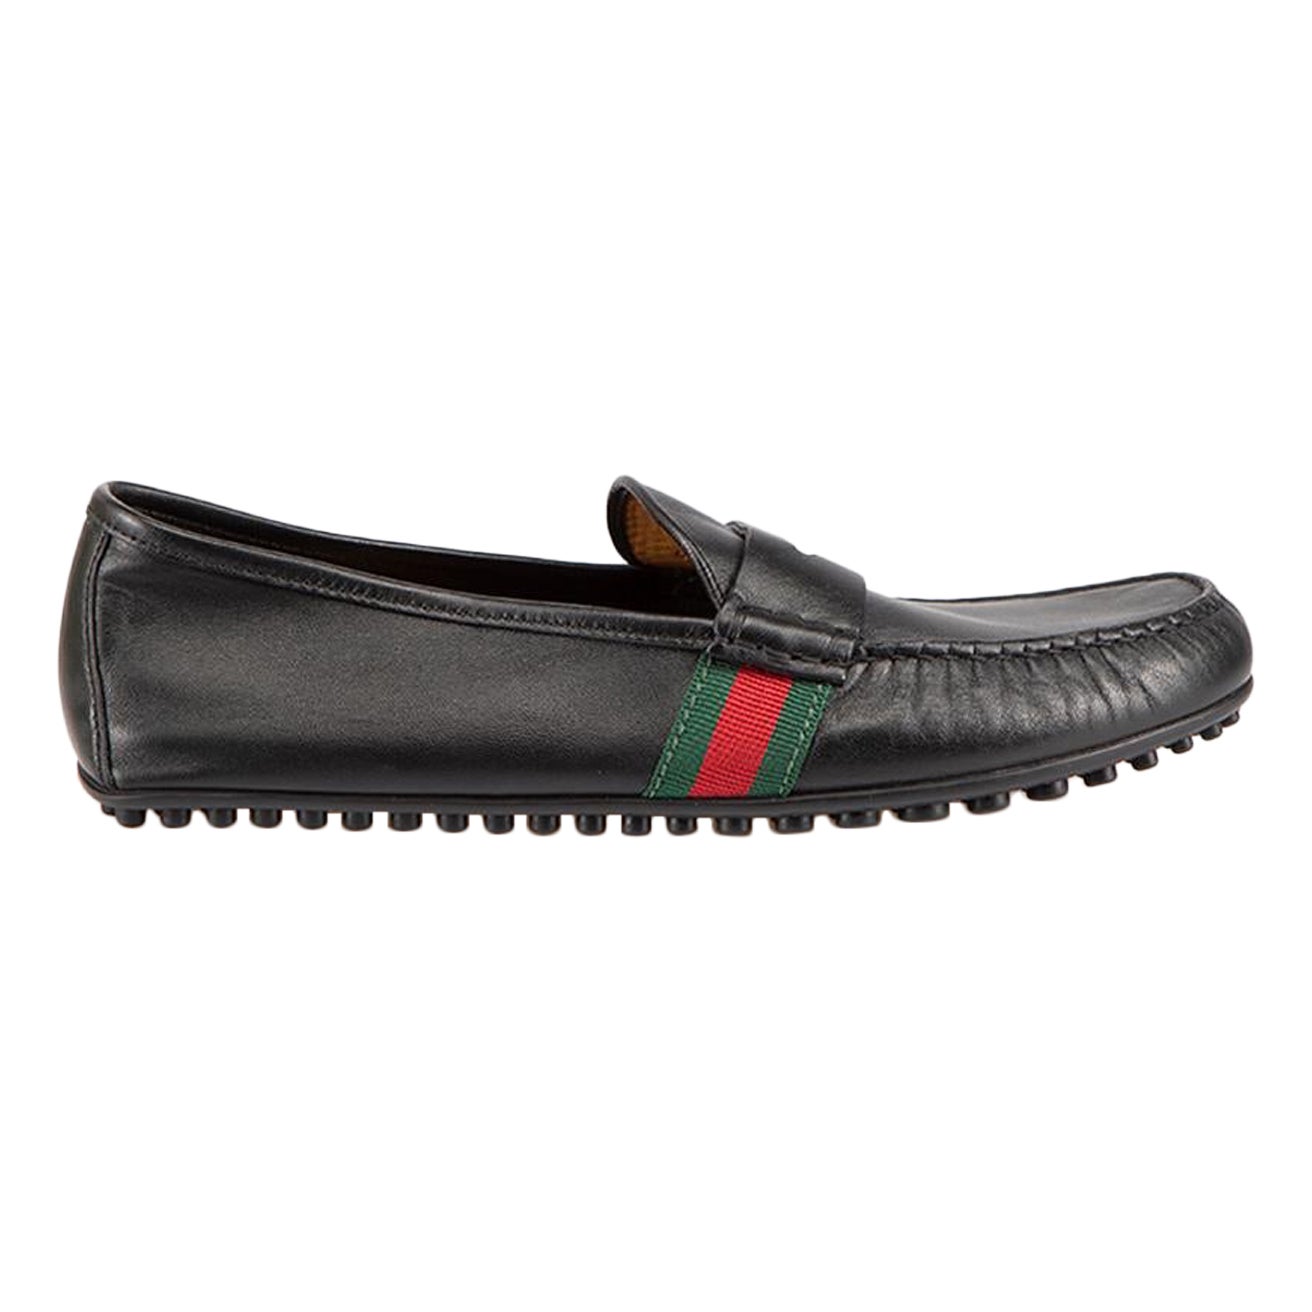 Gucci Black Leather Web Accent Loafers Size UK 8.5